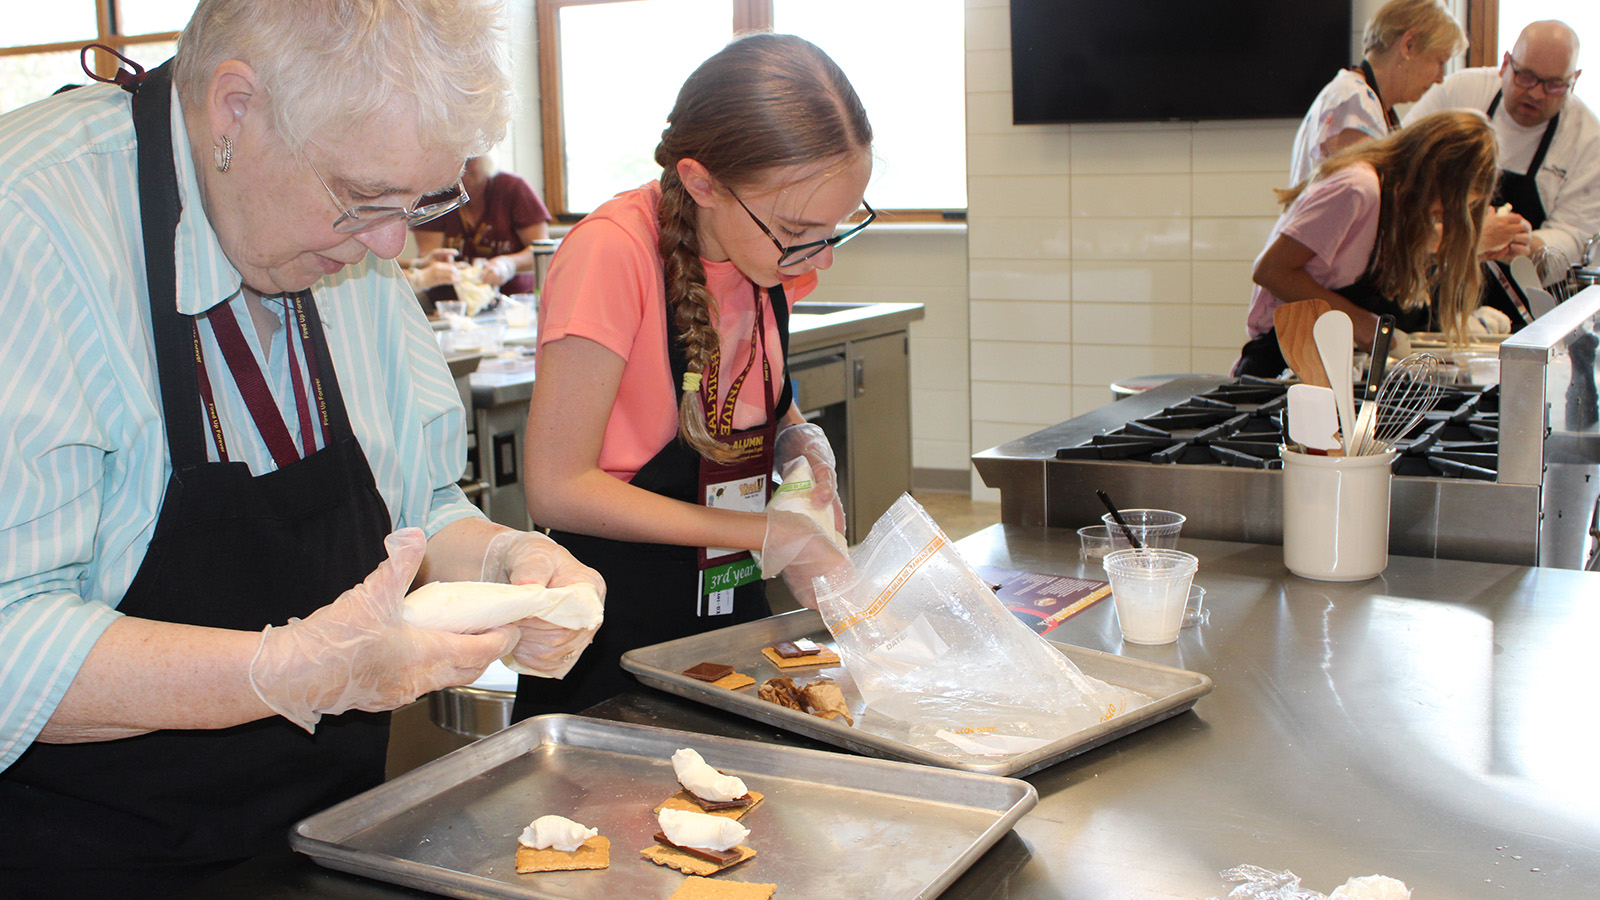 In the foreground, a grandmother and her granddaughter are wearing aprons in a kitchen and making smores. In the background, a chef helps another grandmother and her granddaughter with their smores.